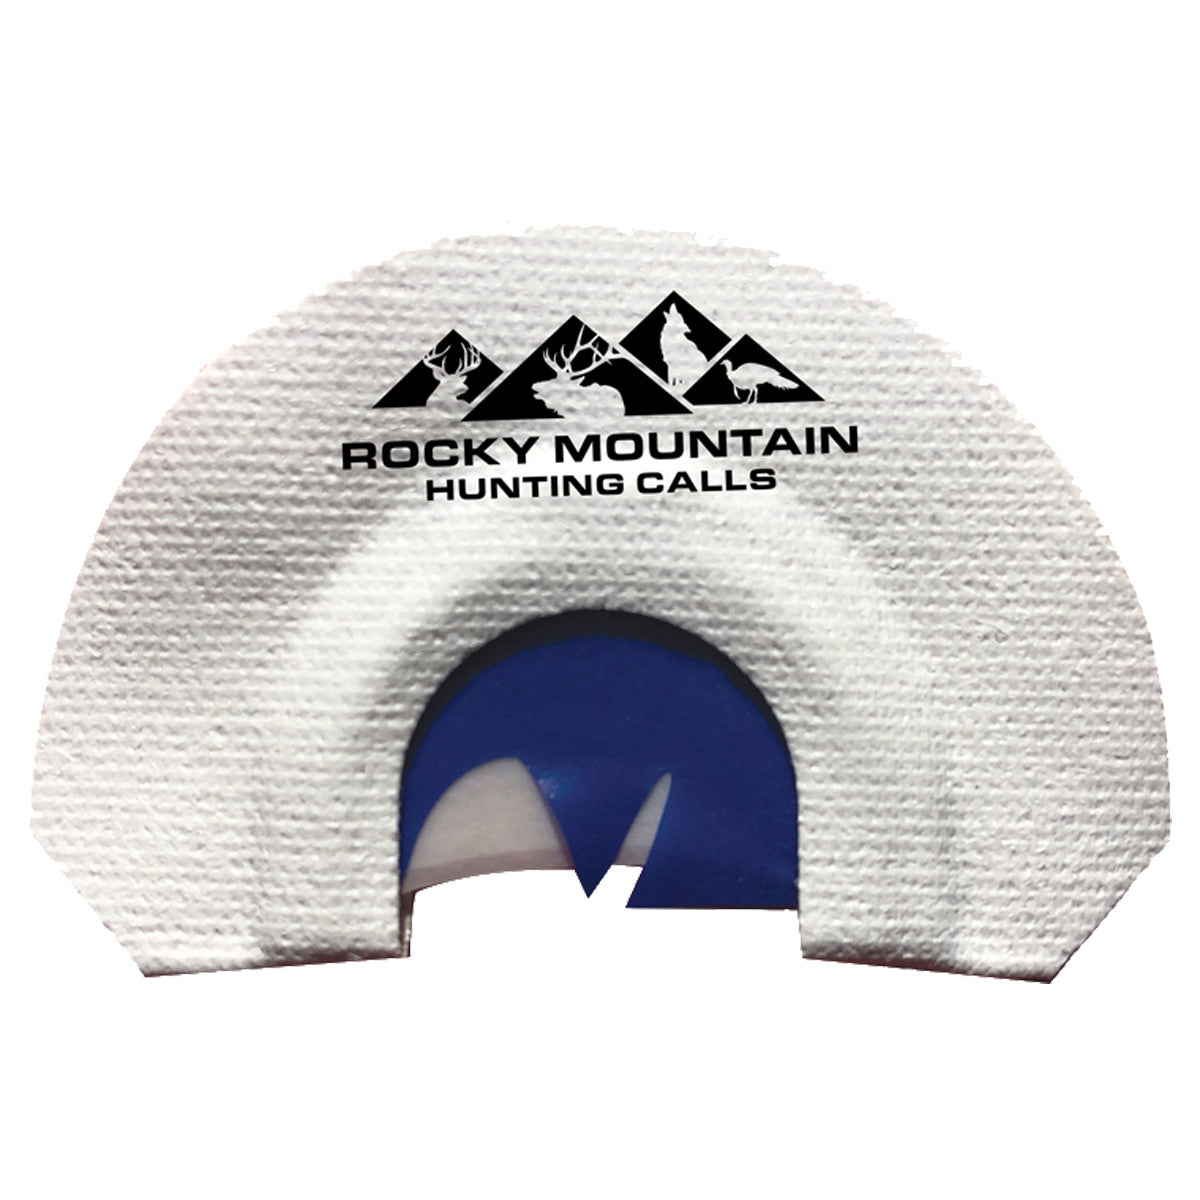 Rocky Mountain Hunting Calls Sharp Tooth Jack Turkey Diaphragm in  by GOHUNT | Rocky Mountain Hunting Calls - GOHUNT Shop